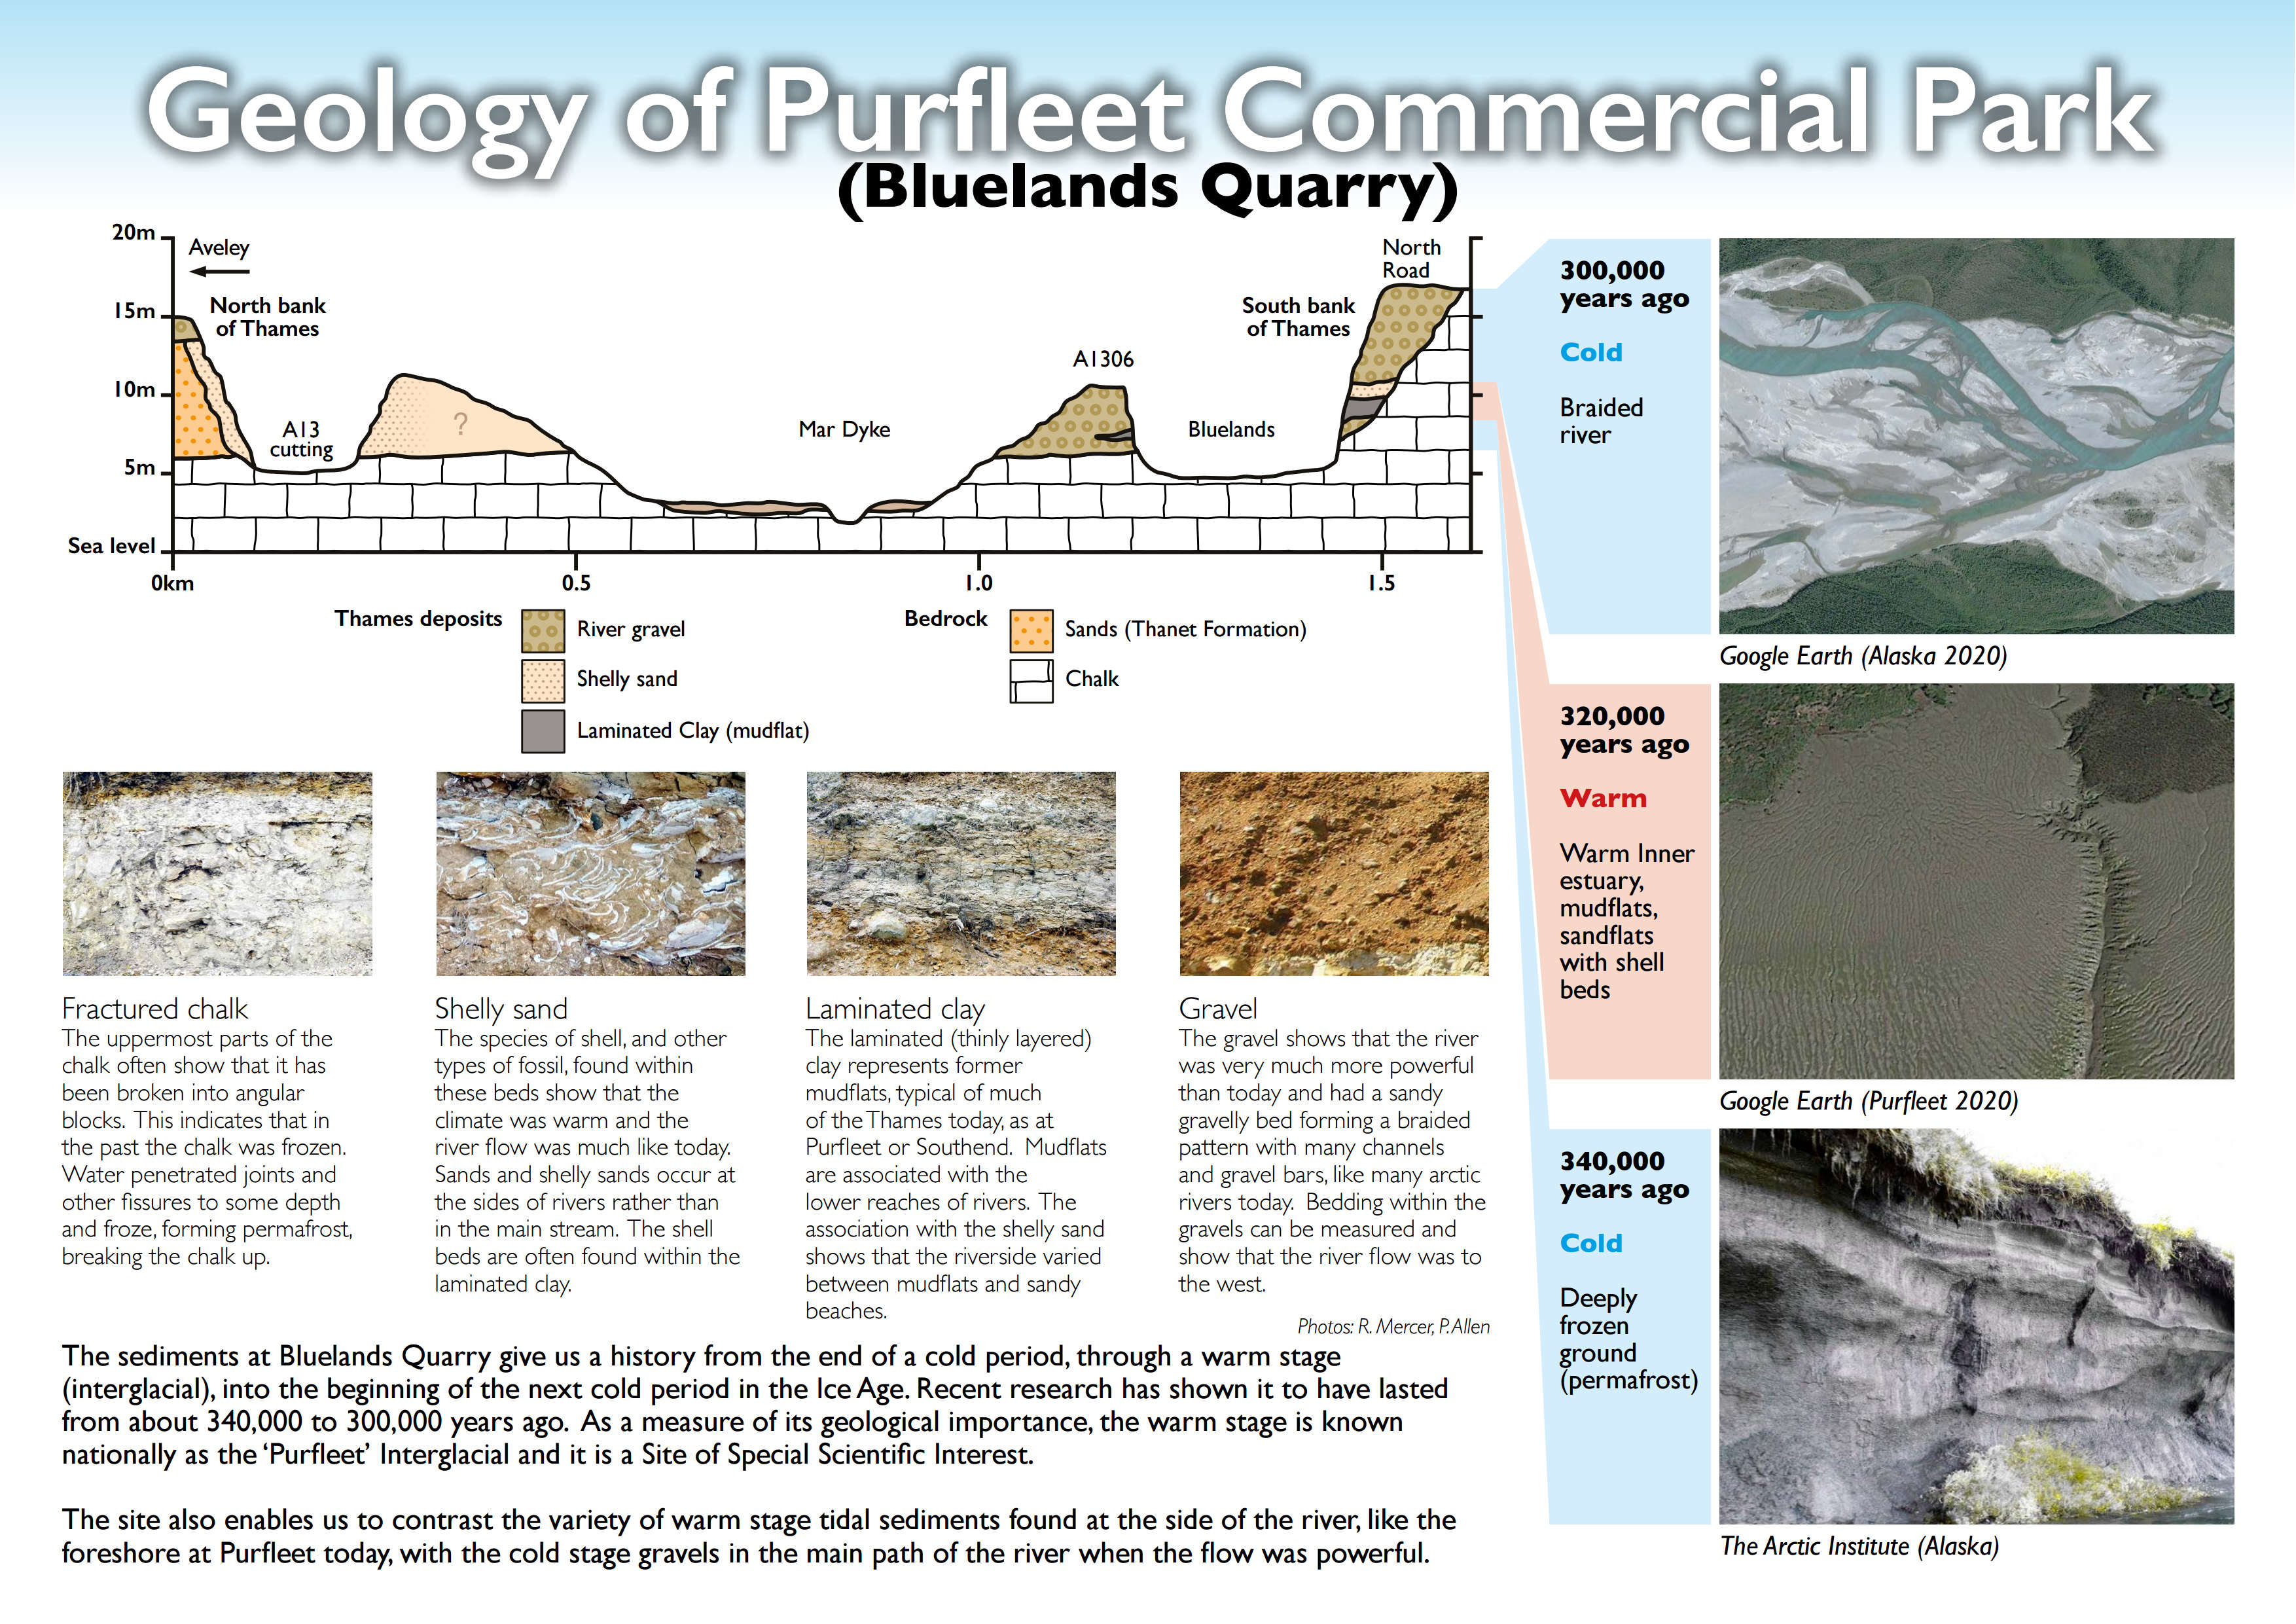 Geology of Purfleet Commercial Park (Bluelands Quarry) 300,000 years ago Cold Braided river 320,000 years ago Warm Warm Inner estuary, mudflats, sandflats with shell beds 340,000 years ago Cold Deeply frozen ground (permafrost)  Aveley North Road North bank of Thames South bank of Thames Thames deposits Bedrock 0km 20m 15m 10m 5m Sea level 05 10 15 River gravel Sands (Thanet Formation) Shelly sand Chalk Laminated Clay (mudflat) Mar Dyke A1306 A13 cutting Bluelands Fractured chalk The uppermost parts of the chalk often show that it has been broken into angular blocks This indicates that in the past the chalk was frozen Water penetrated joints and other fissures to some depth and froze, forming permafrost, breaking the chalk up Shelly sand The species of shell, and other types of fossil, found within these beds show that the climate was warm and the river flow was much like today Sands and shelly sands occur at the sides of rivers rather than in the main stream The shell beds are often found within the laminated clay Laminated clay The laminated (thinly layered) clay represents former mudflats, typical of much of the Thames today, as at Purfleet or Southend Mudflats are associated with the lower reaches of rivers The association with the shelly sand shows that the riverside varied between mudflats and sandy beaches Gravel The gravel shows that the river was very much more powerful than today and had a sandy gravelly bed forming a braided pattern with many channels and gravel bars, like many arctic rivers today Bedding within the gravels can be measured and show that the river flow was to the west The sediments at Bluelands Quarry give us a history from the end of a cold period, through a warm stage (interglacial), into the beginning of the next cold period in the Ice Age Recent research has shown it to have lasted from about 340,000 to 300,000 years ago As a measure of its geological importance, the warm stage is known nationally as the ‘Purfleet’ Interglacial and it is a Site of Special Scientific Interest The site also enables us to contrast the variety of warm stage tidal sediments found at the side of the river, like the foreshore at Purfleet today, with the cold stage gravels in the main path of the river when the flow was powerful